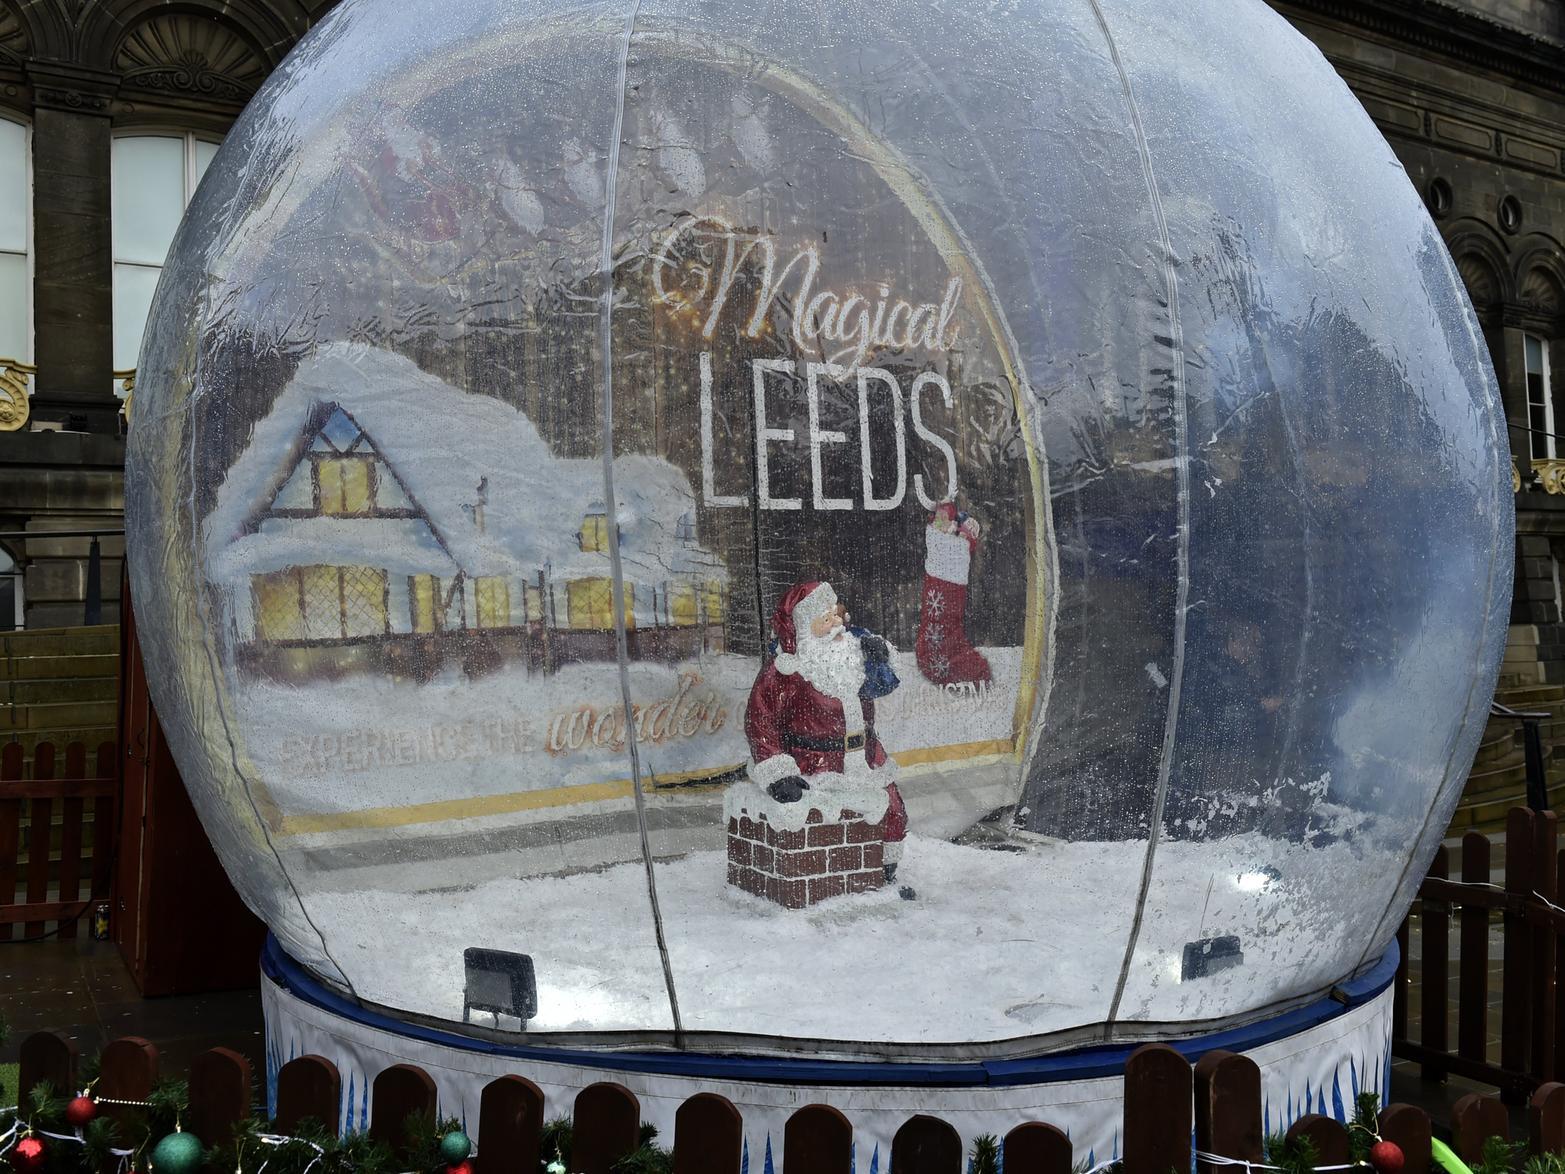 The countdown to Christmas in Leeds begins!